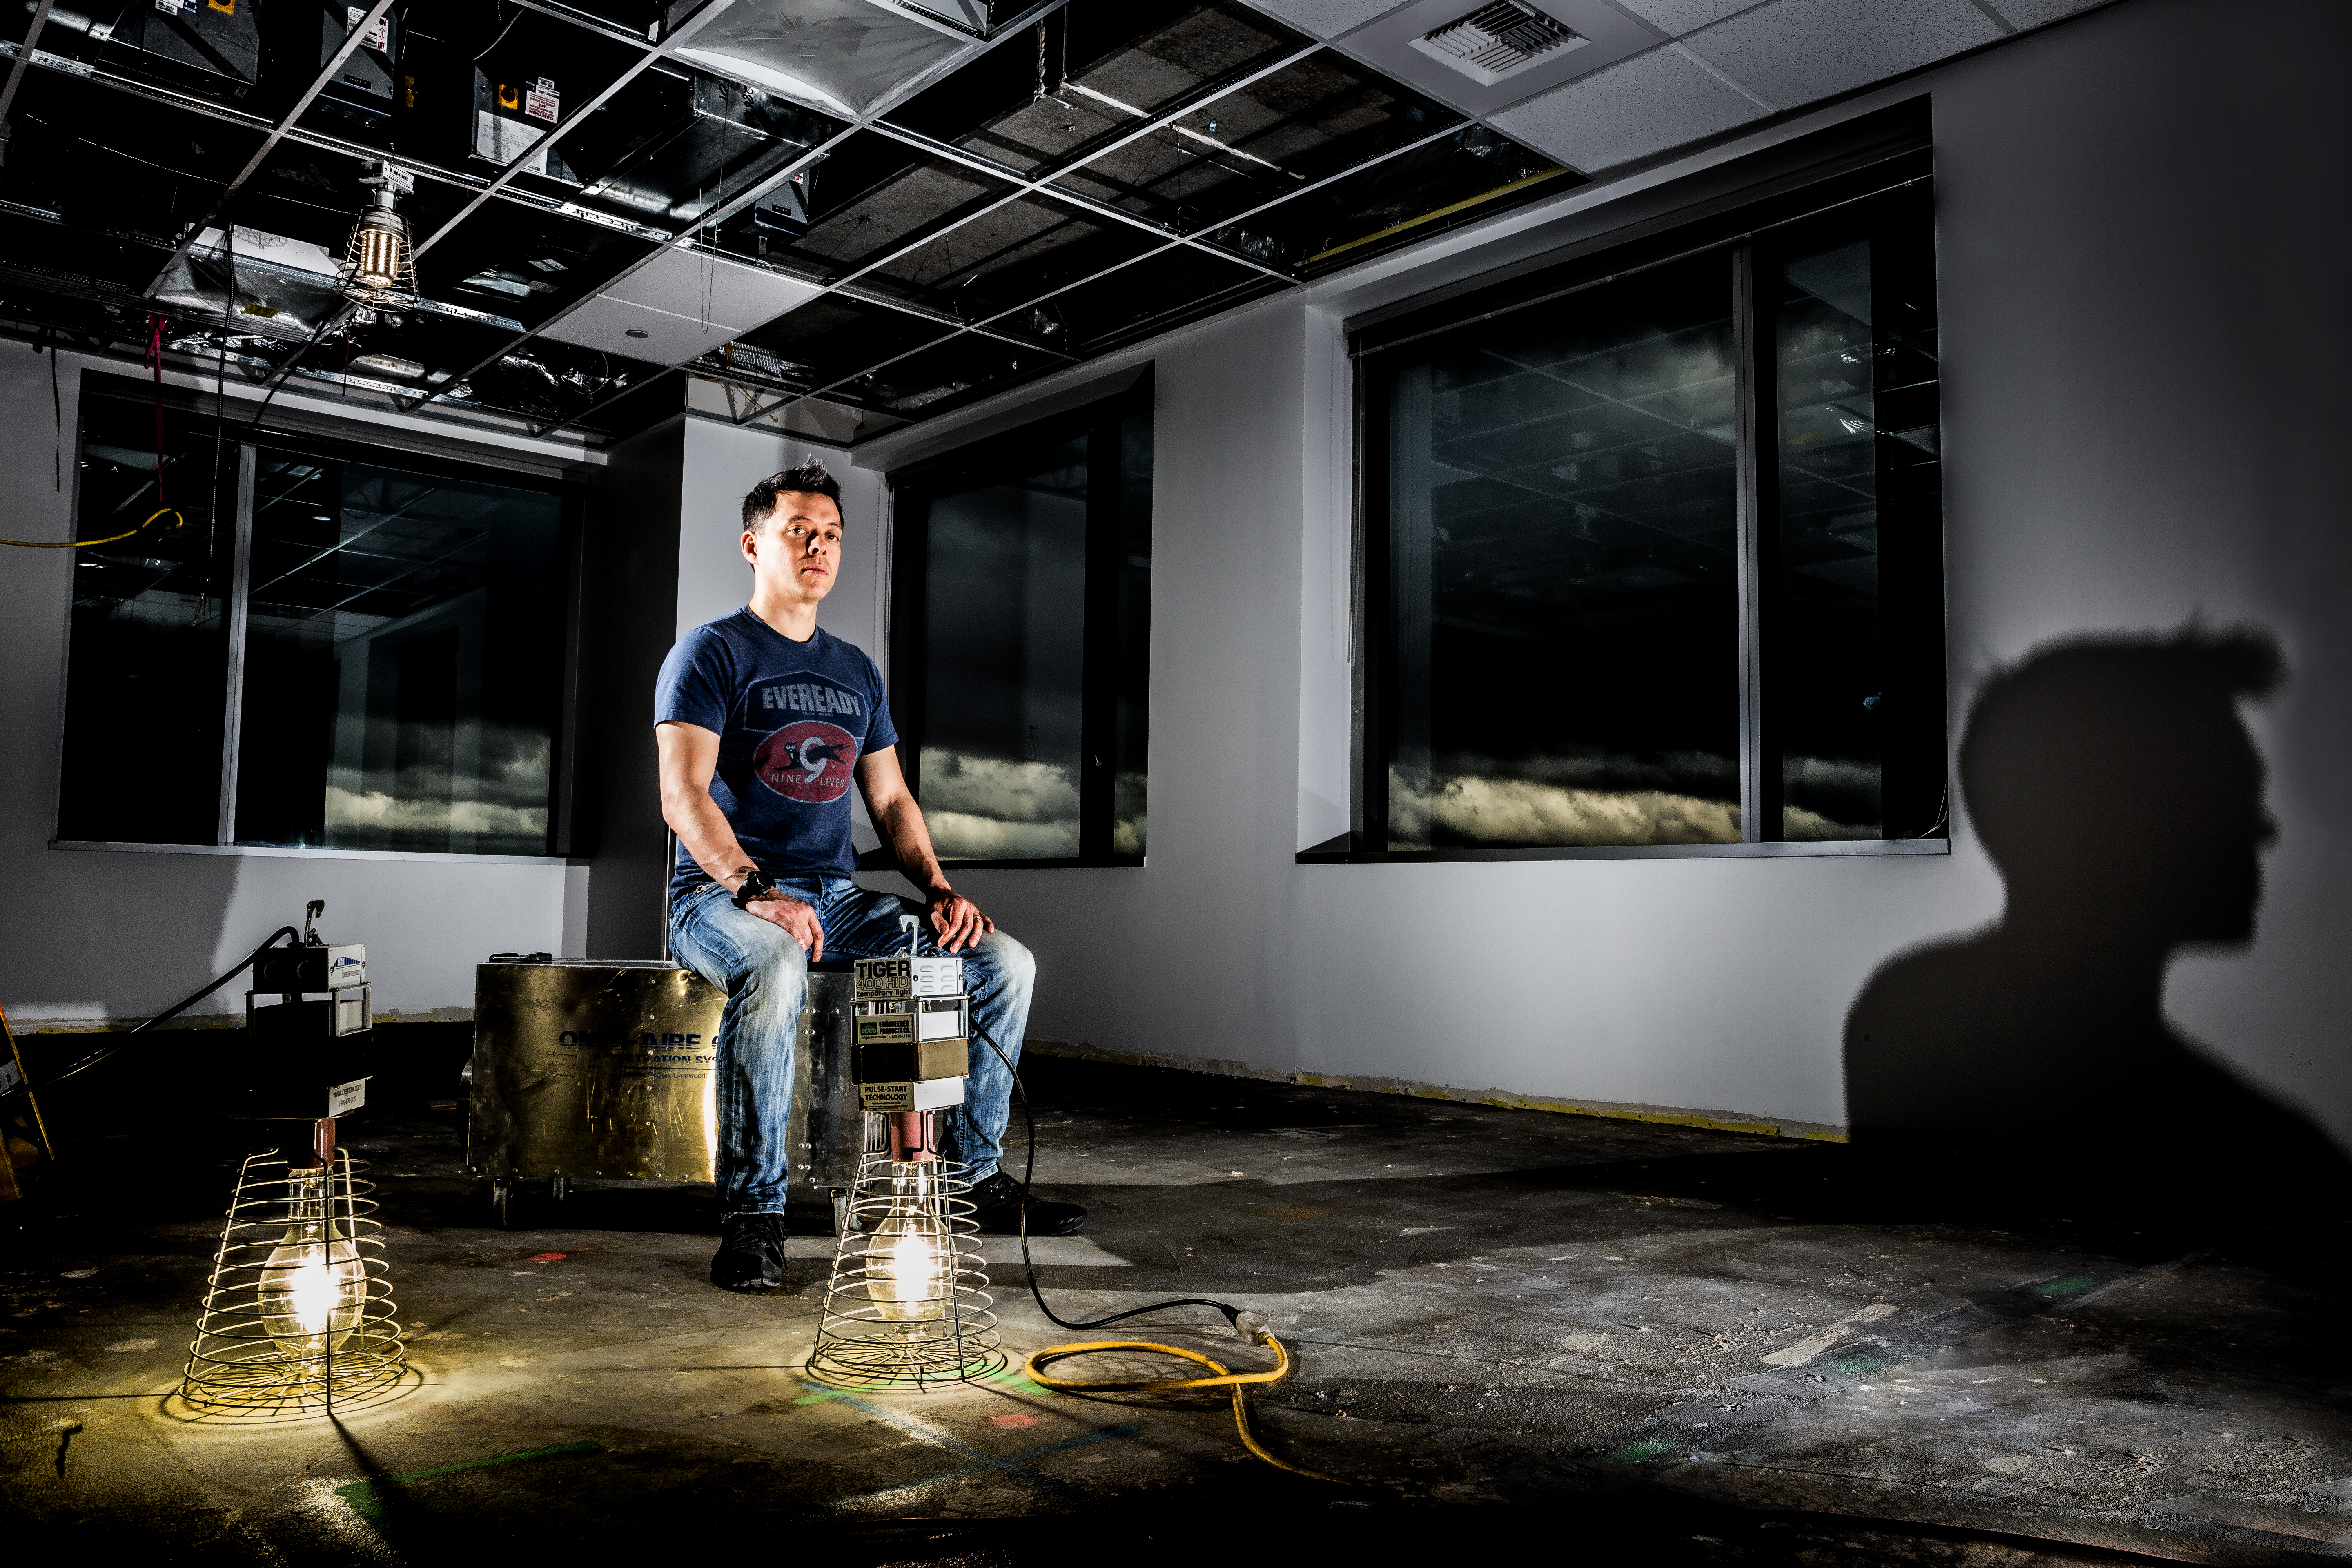 Lawrence Ripsher of Microsoft's Loop team photographed in their new work space, which is under construction at Bravern 2 in Bellevue on October 28, 2015. (Photography by Scott Eklund/Red Box Pictures)